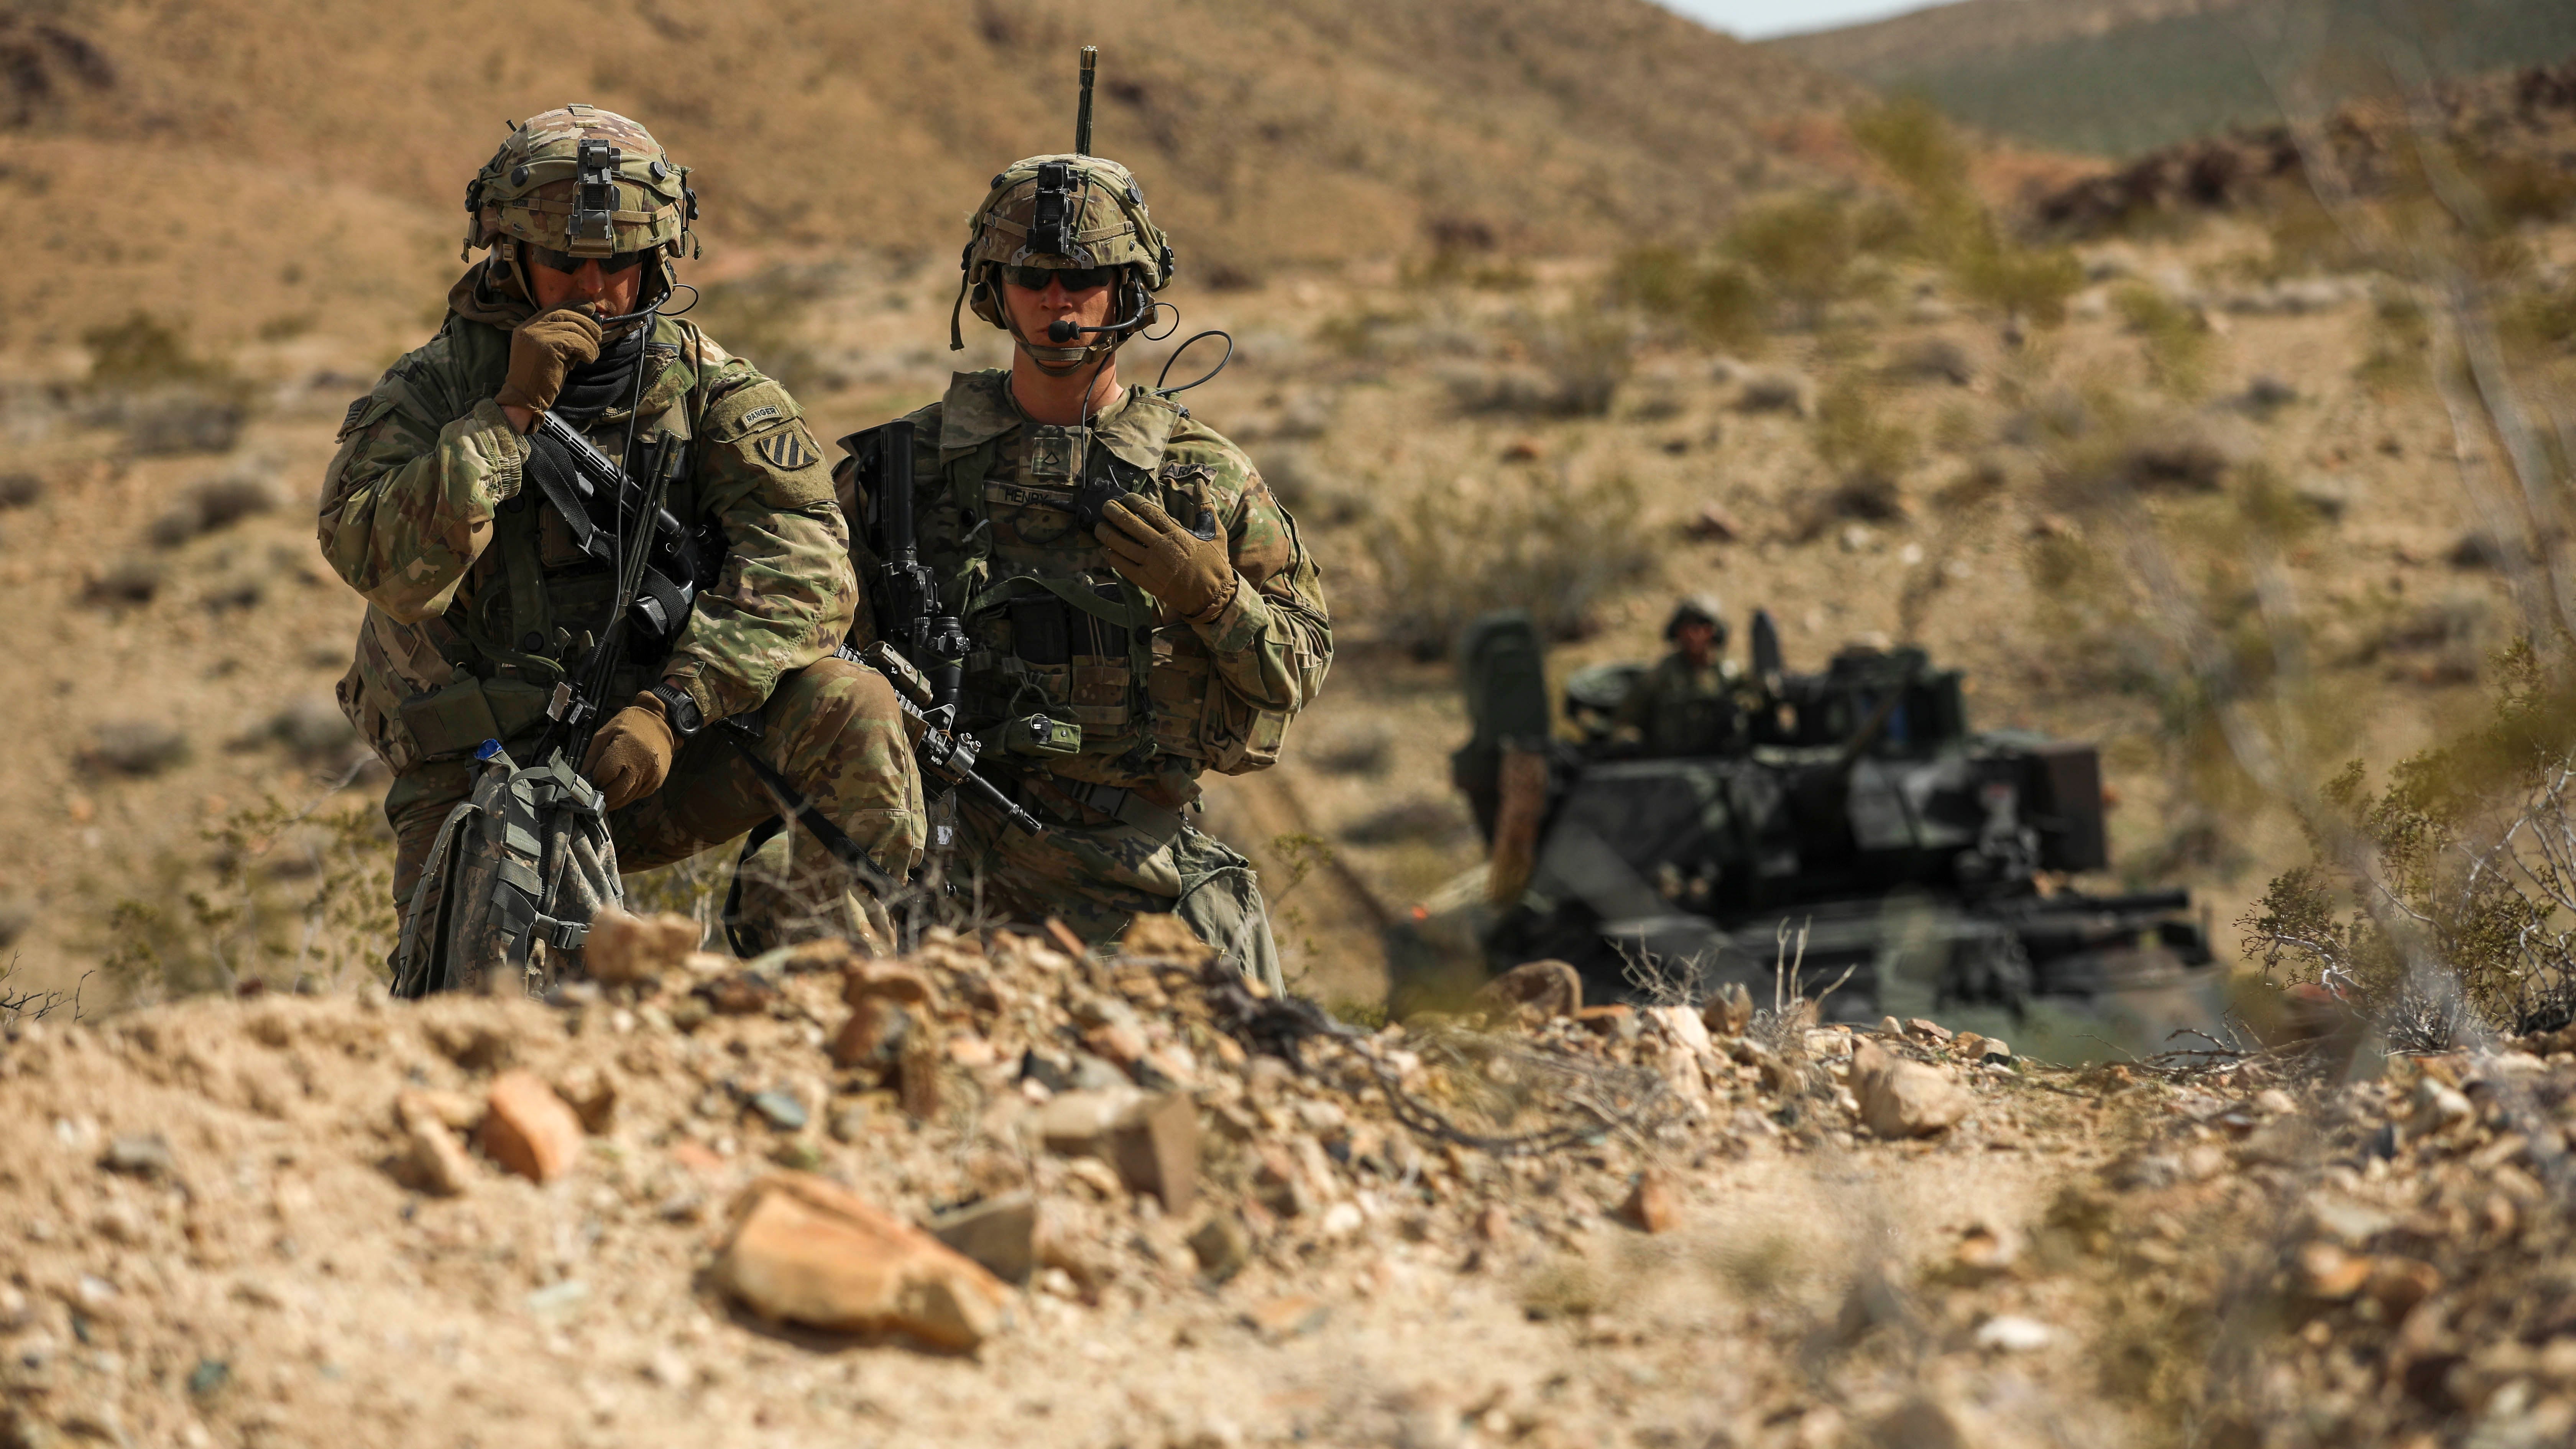 Soldiers assigned to the 3rd Infantry Division’s 2nd Armored Brigade Combat Team communicate and observe the battlefield during a live-fire exercise at the National Training Center, Fort Irwin, California. (Credit: U.S. Army/Spc. Duke Edwards)